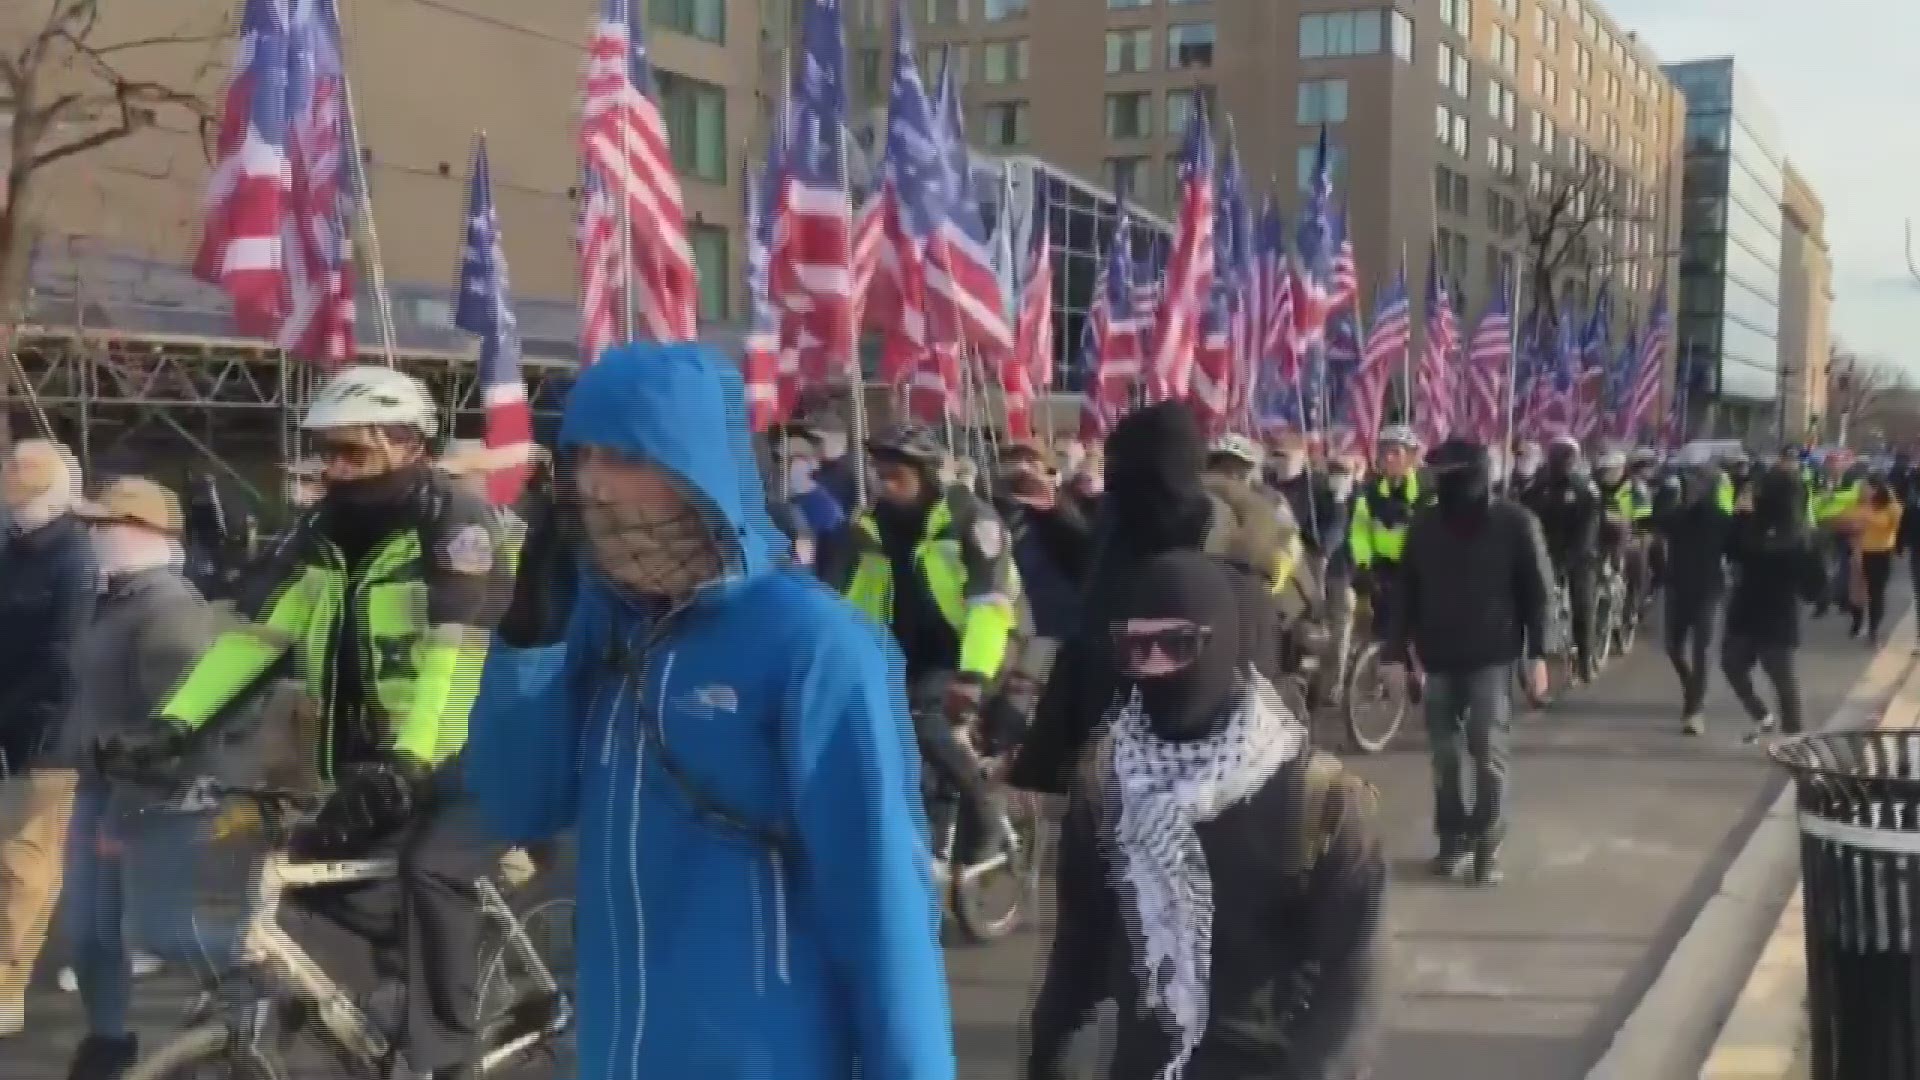 A march by the Neo-Nazi group Patriot Front was done near Union Station in Washington around 4 p.m. on Saturday.